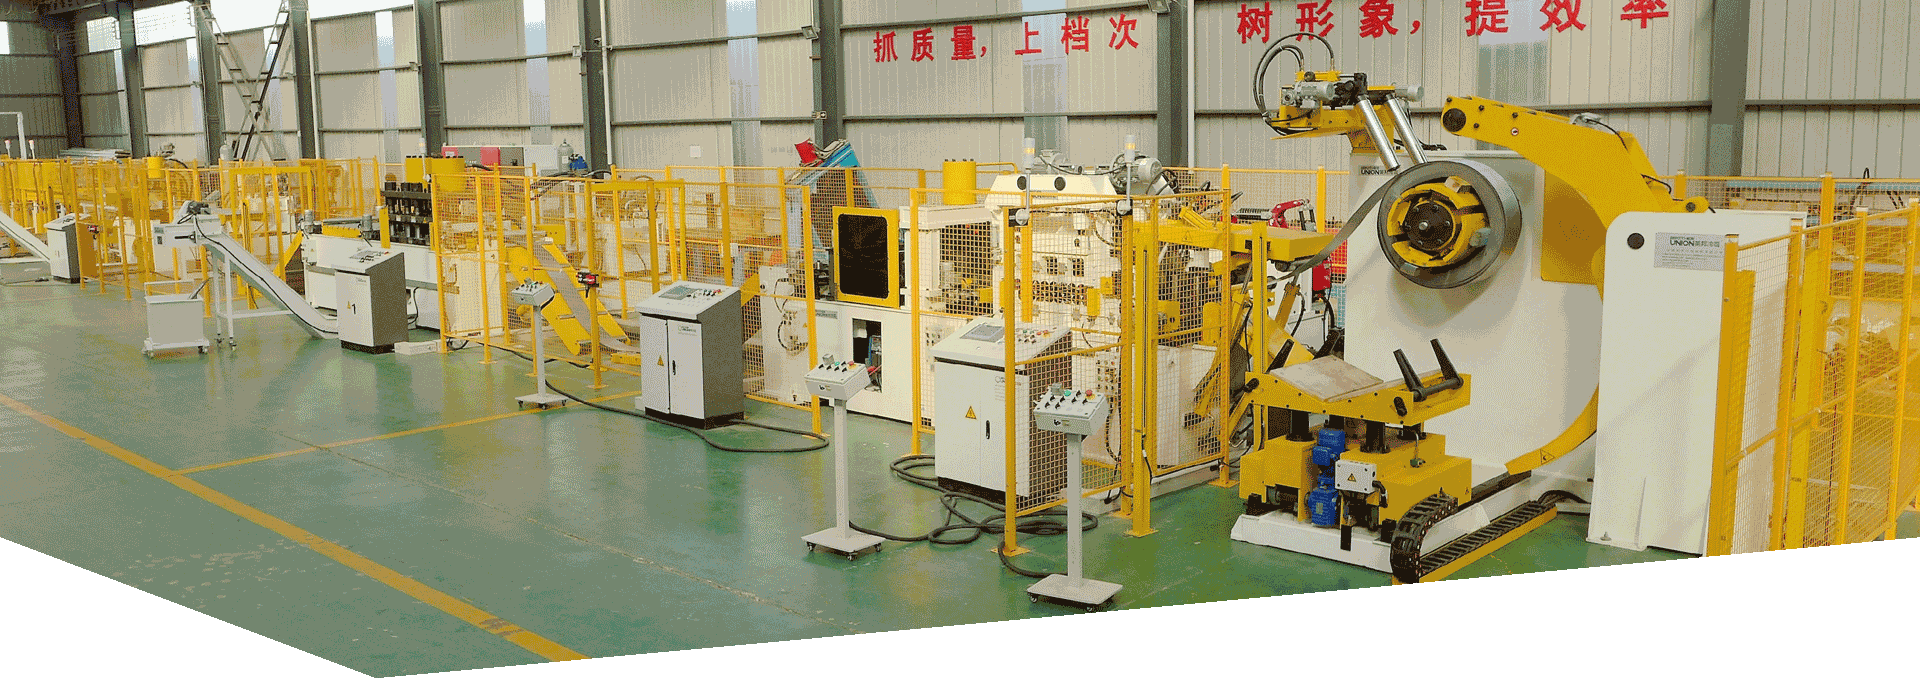 Brother Union Machinery Automotive Roll Forming Line Banner-05-20201203-3